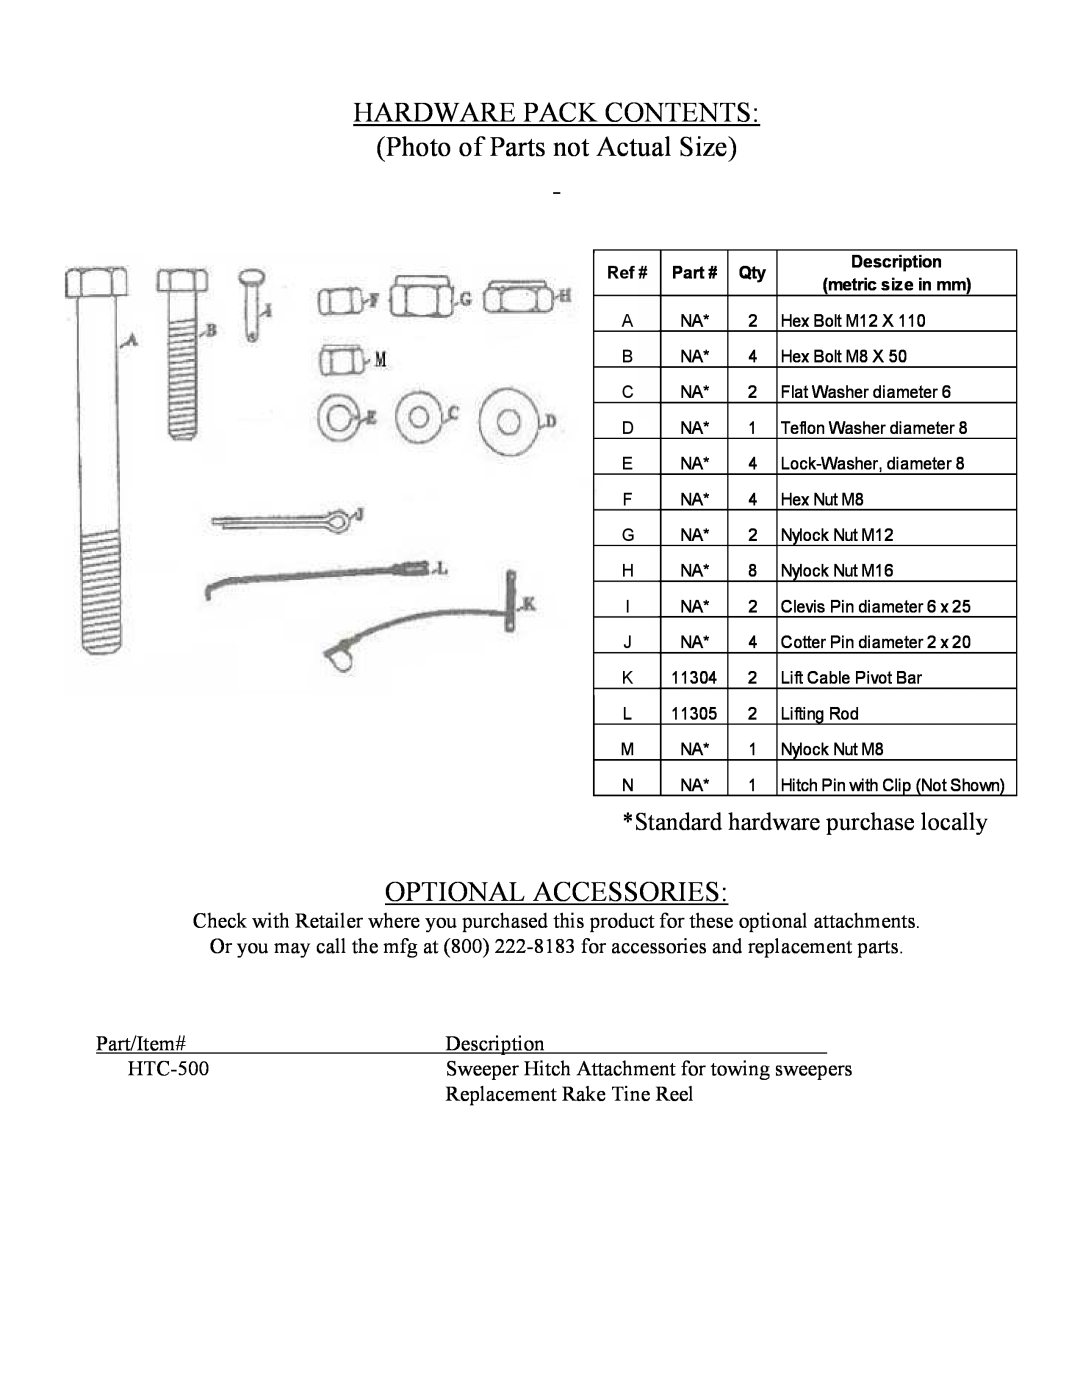 Swisher ACR-500, ACR-500S owner manual Hardware Pack Contents, Photo of Parts not Actual Size, Optional Accessories 